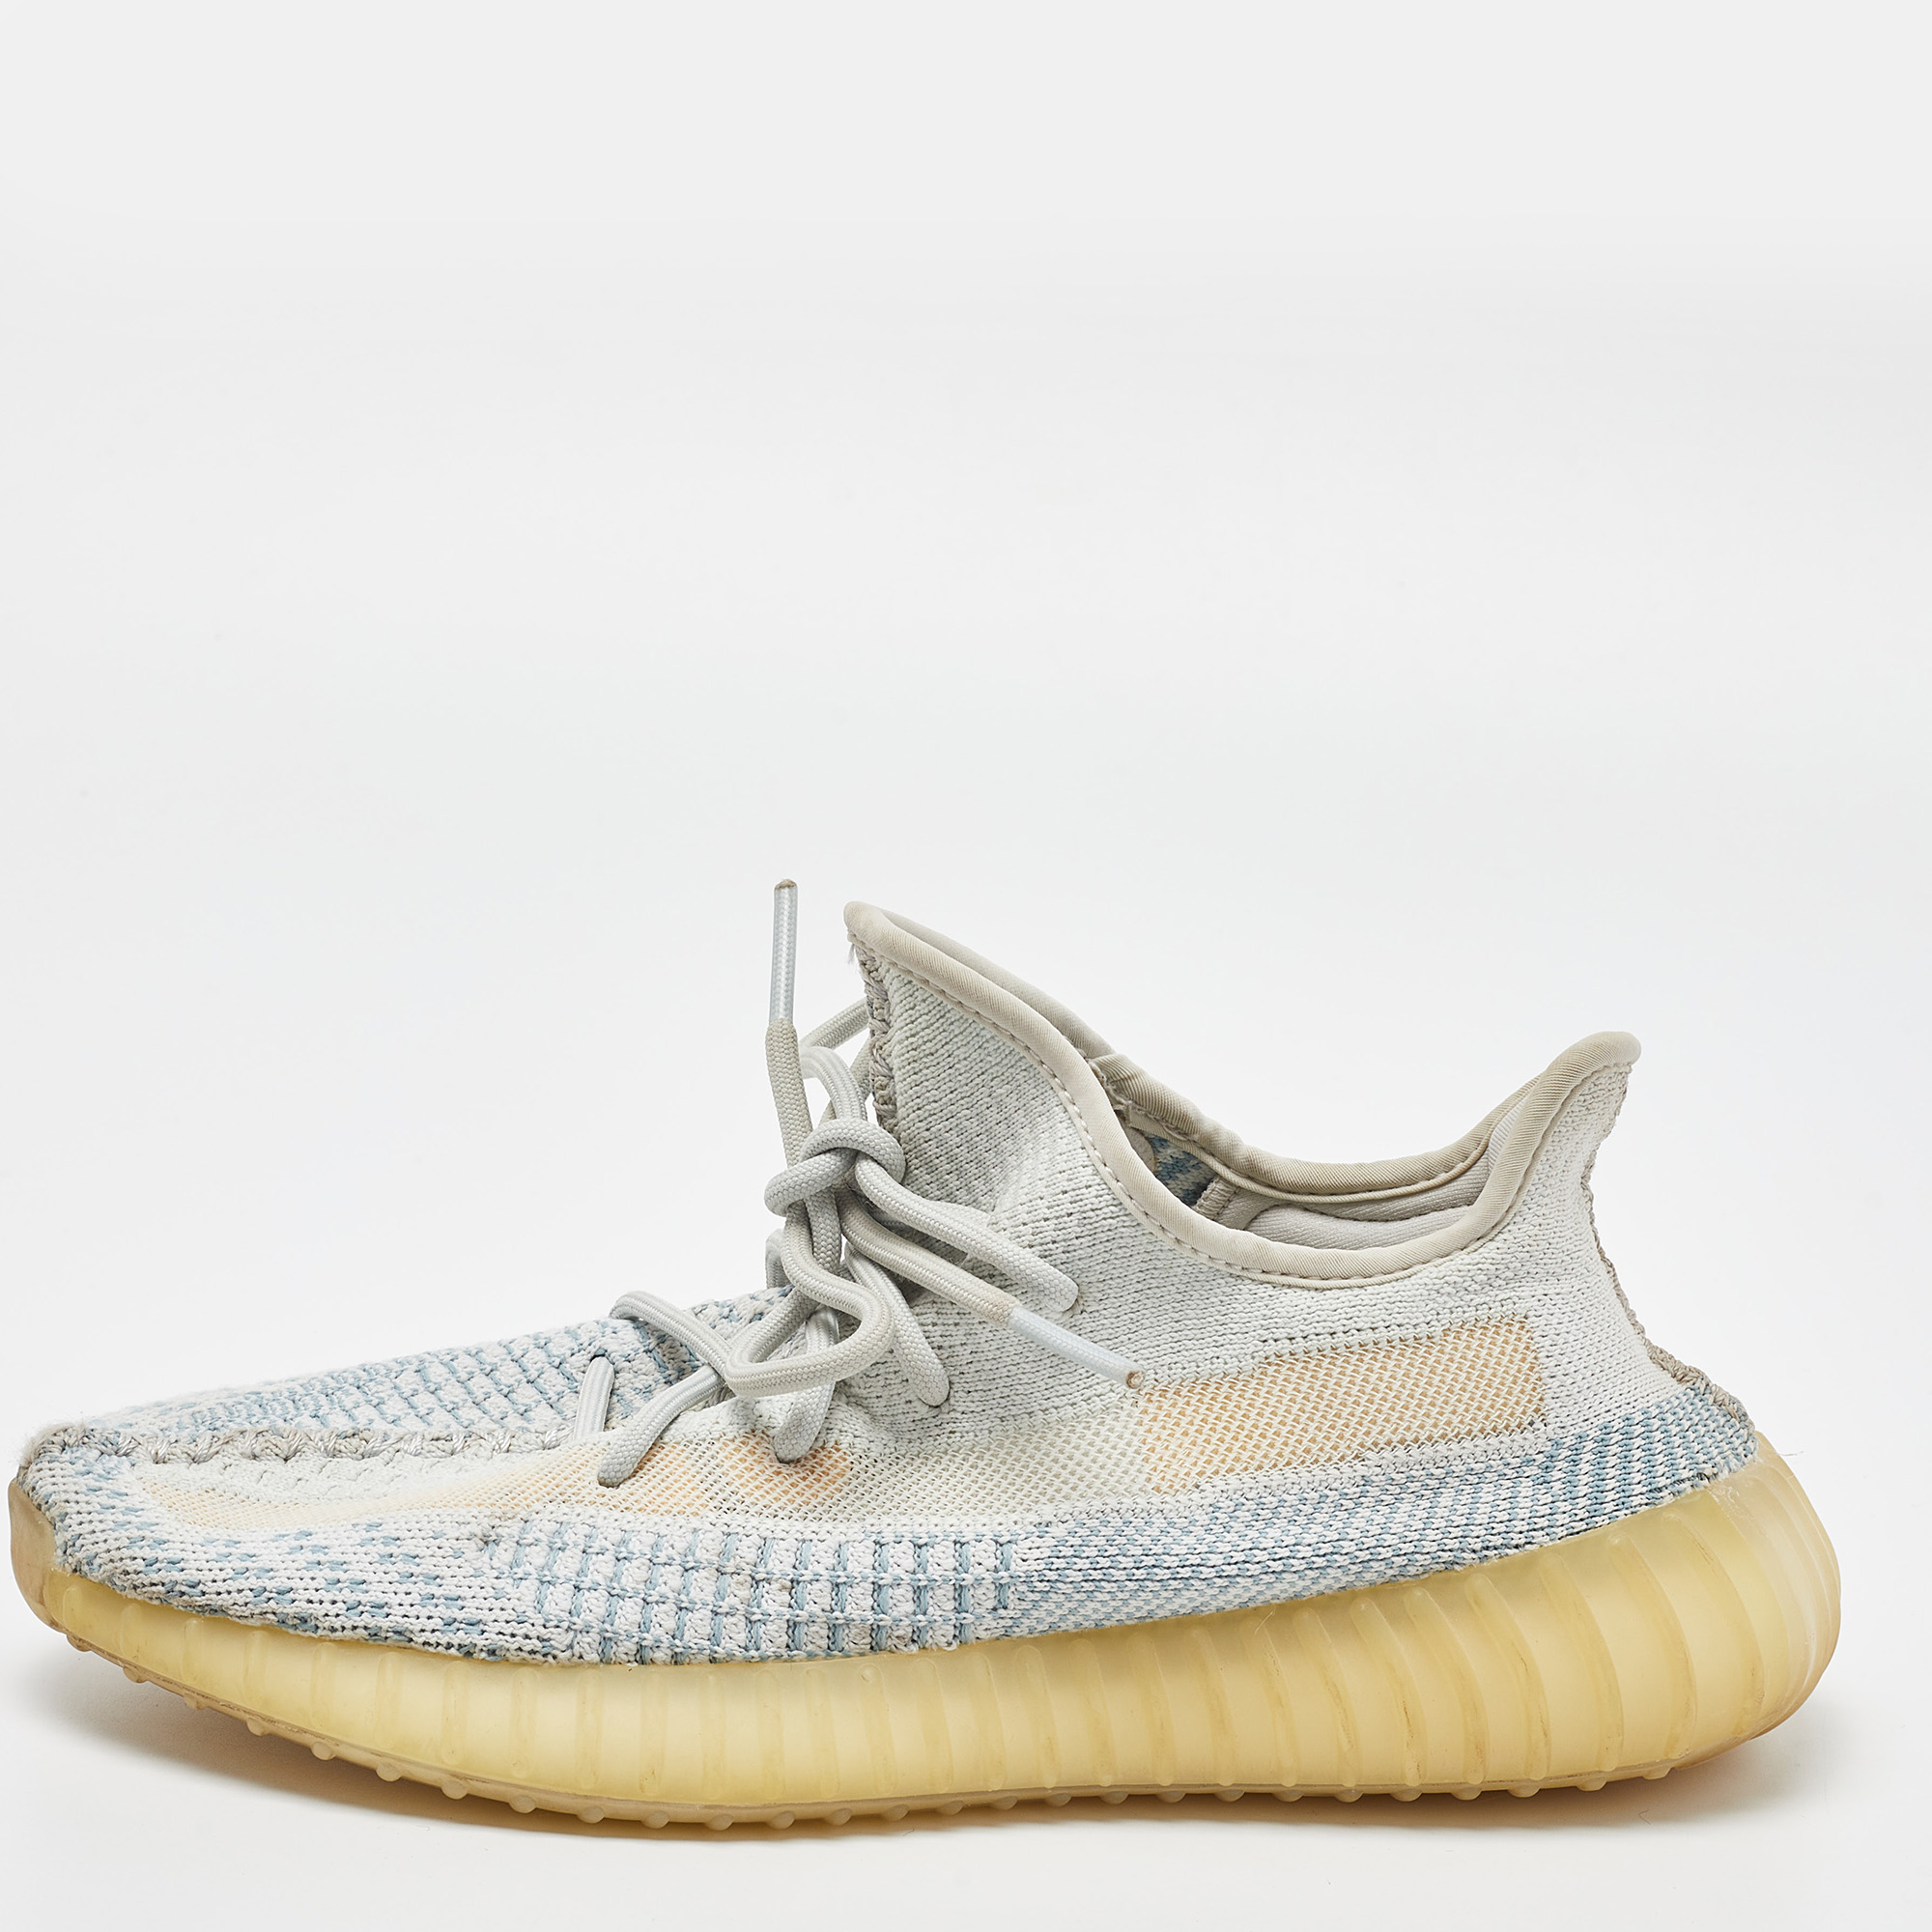 

Yeezy x Adidas White/Green Knit Fabric Boost 350 V2 Cloud White Non Reflective Sneakers Size 40 2/3